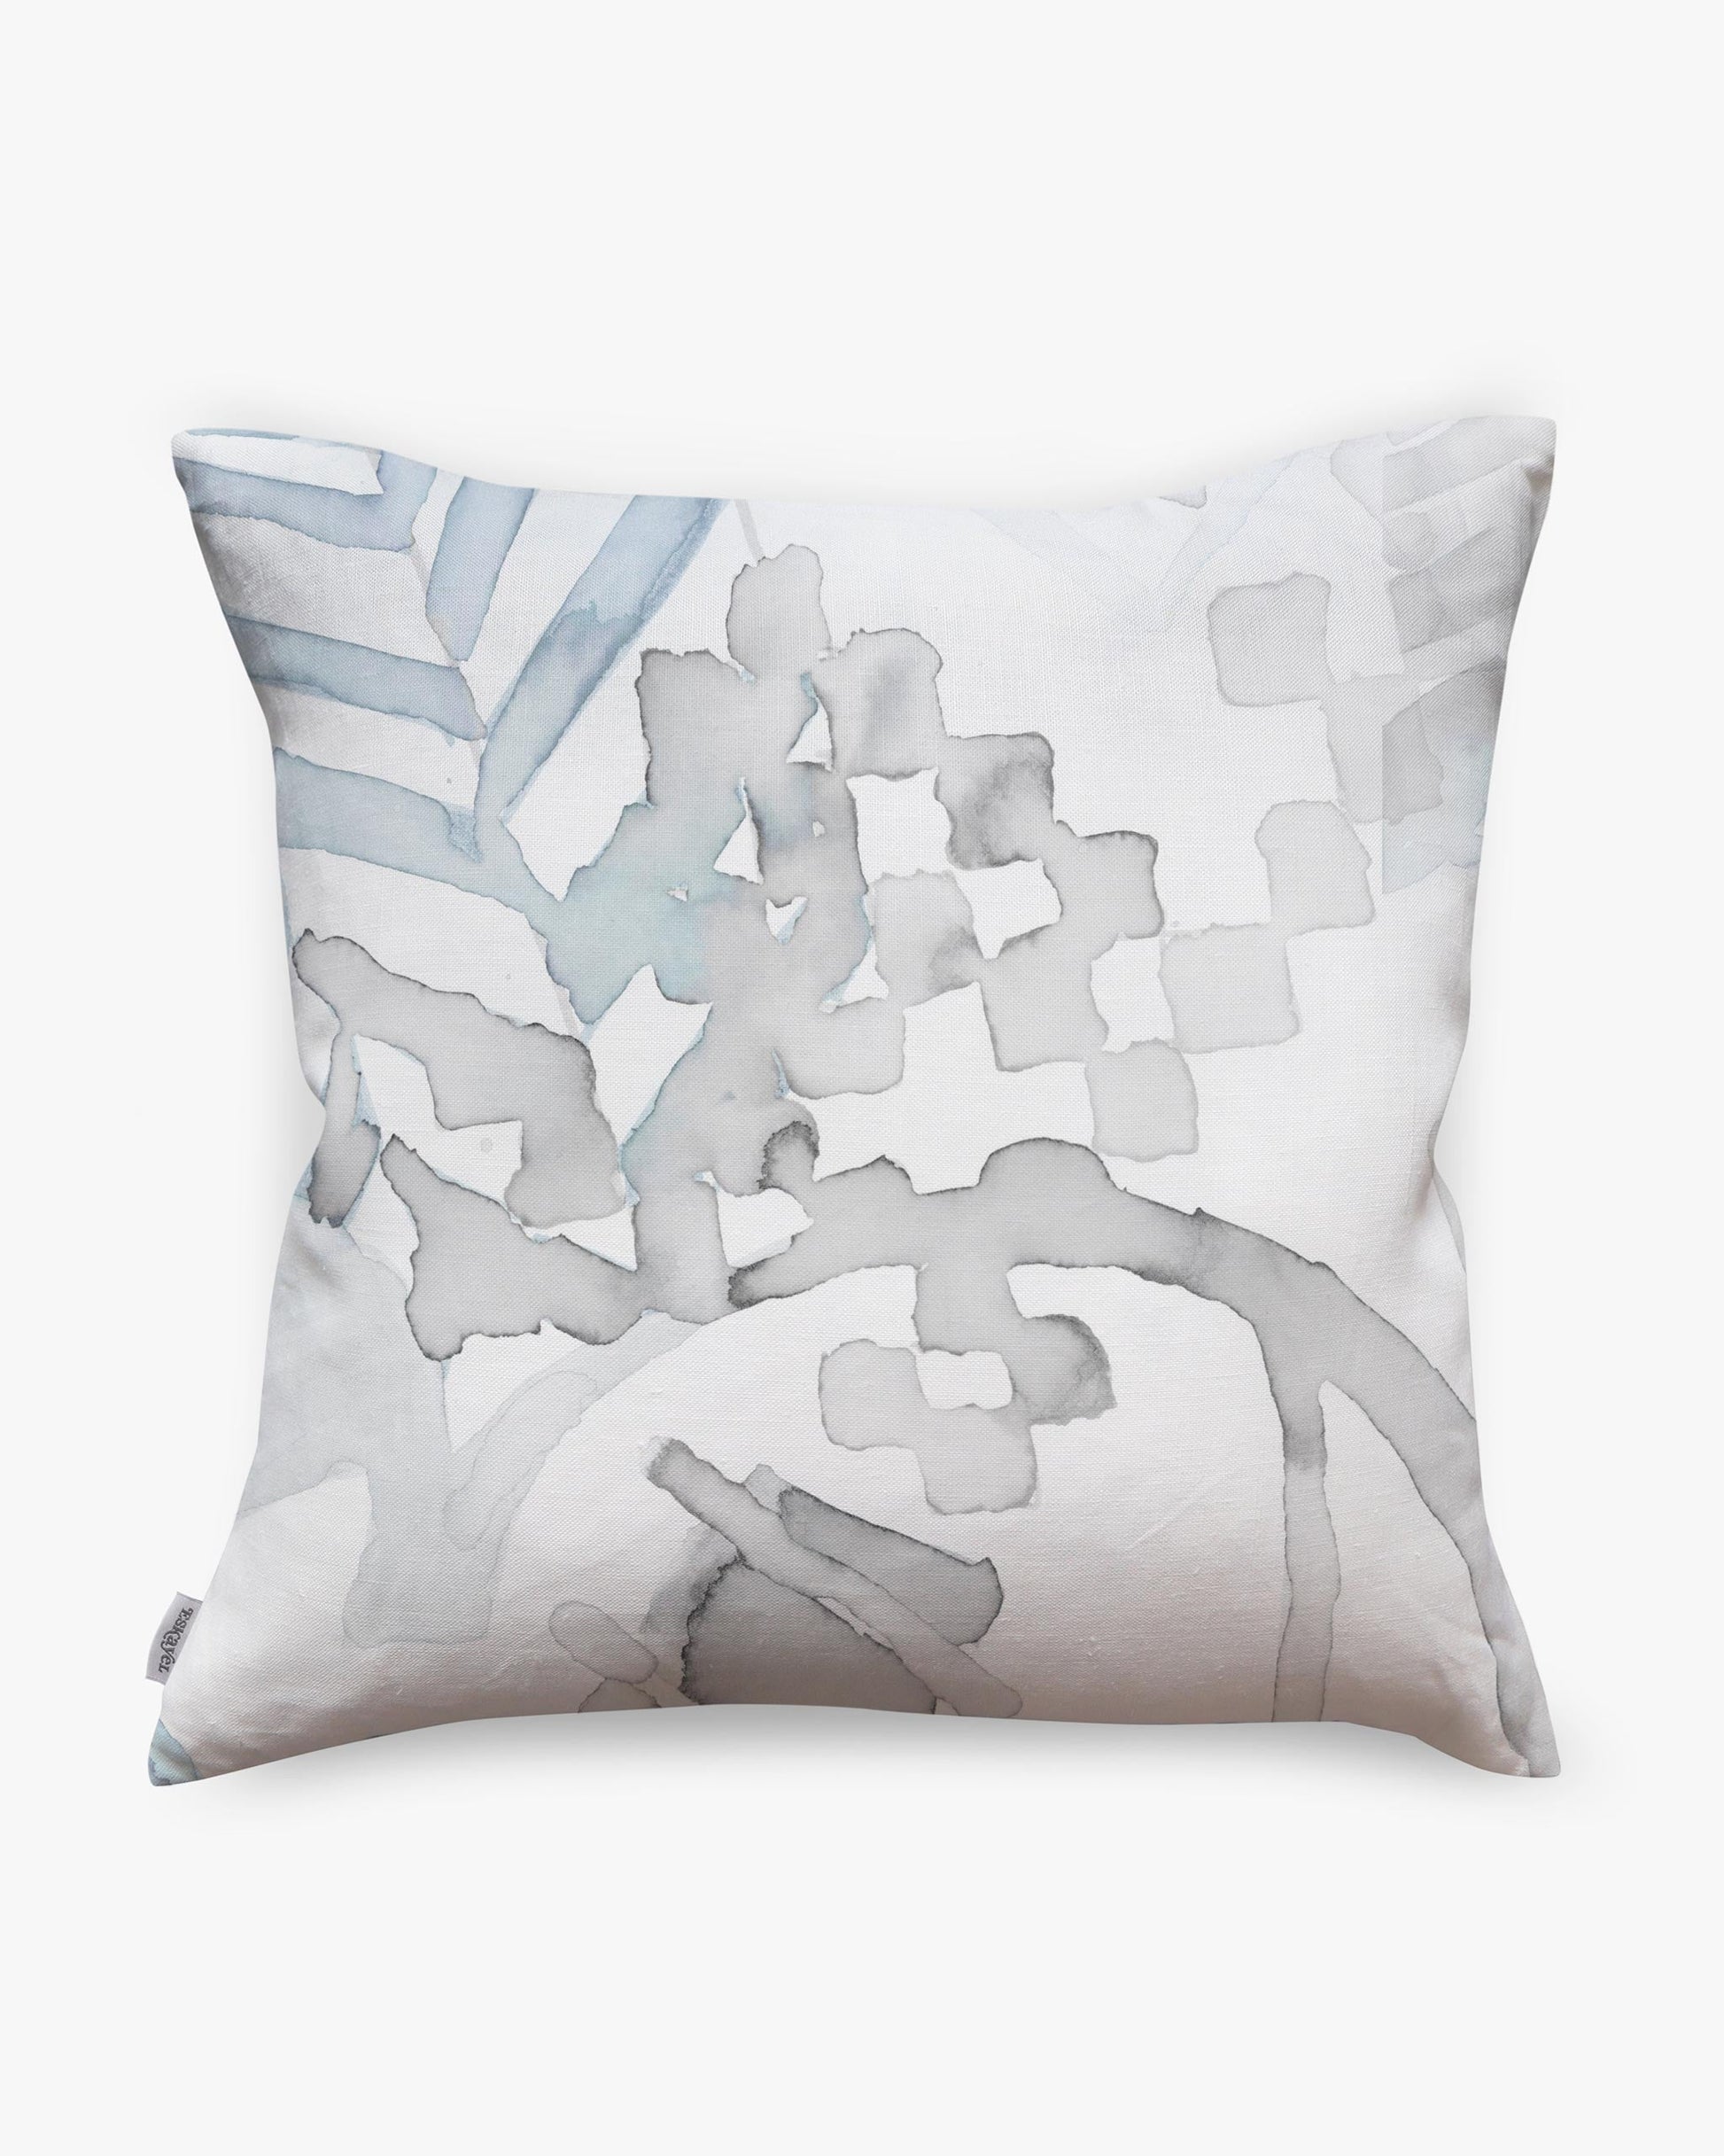 A Sea Galaxy Pillow with a blue and white Eskayel design on it